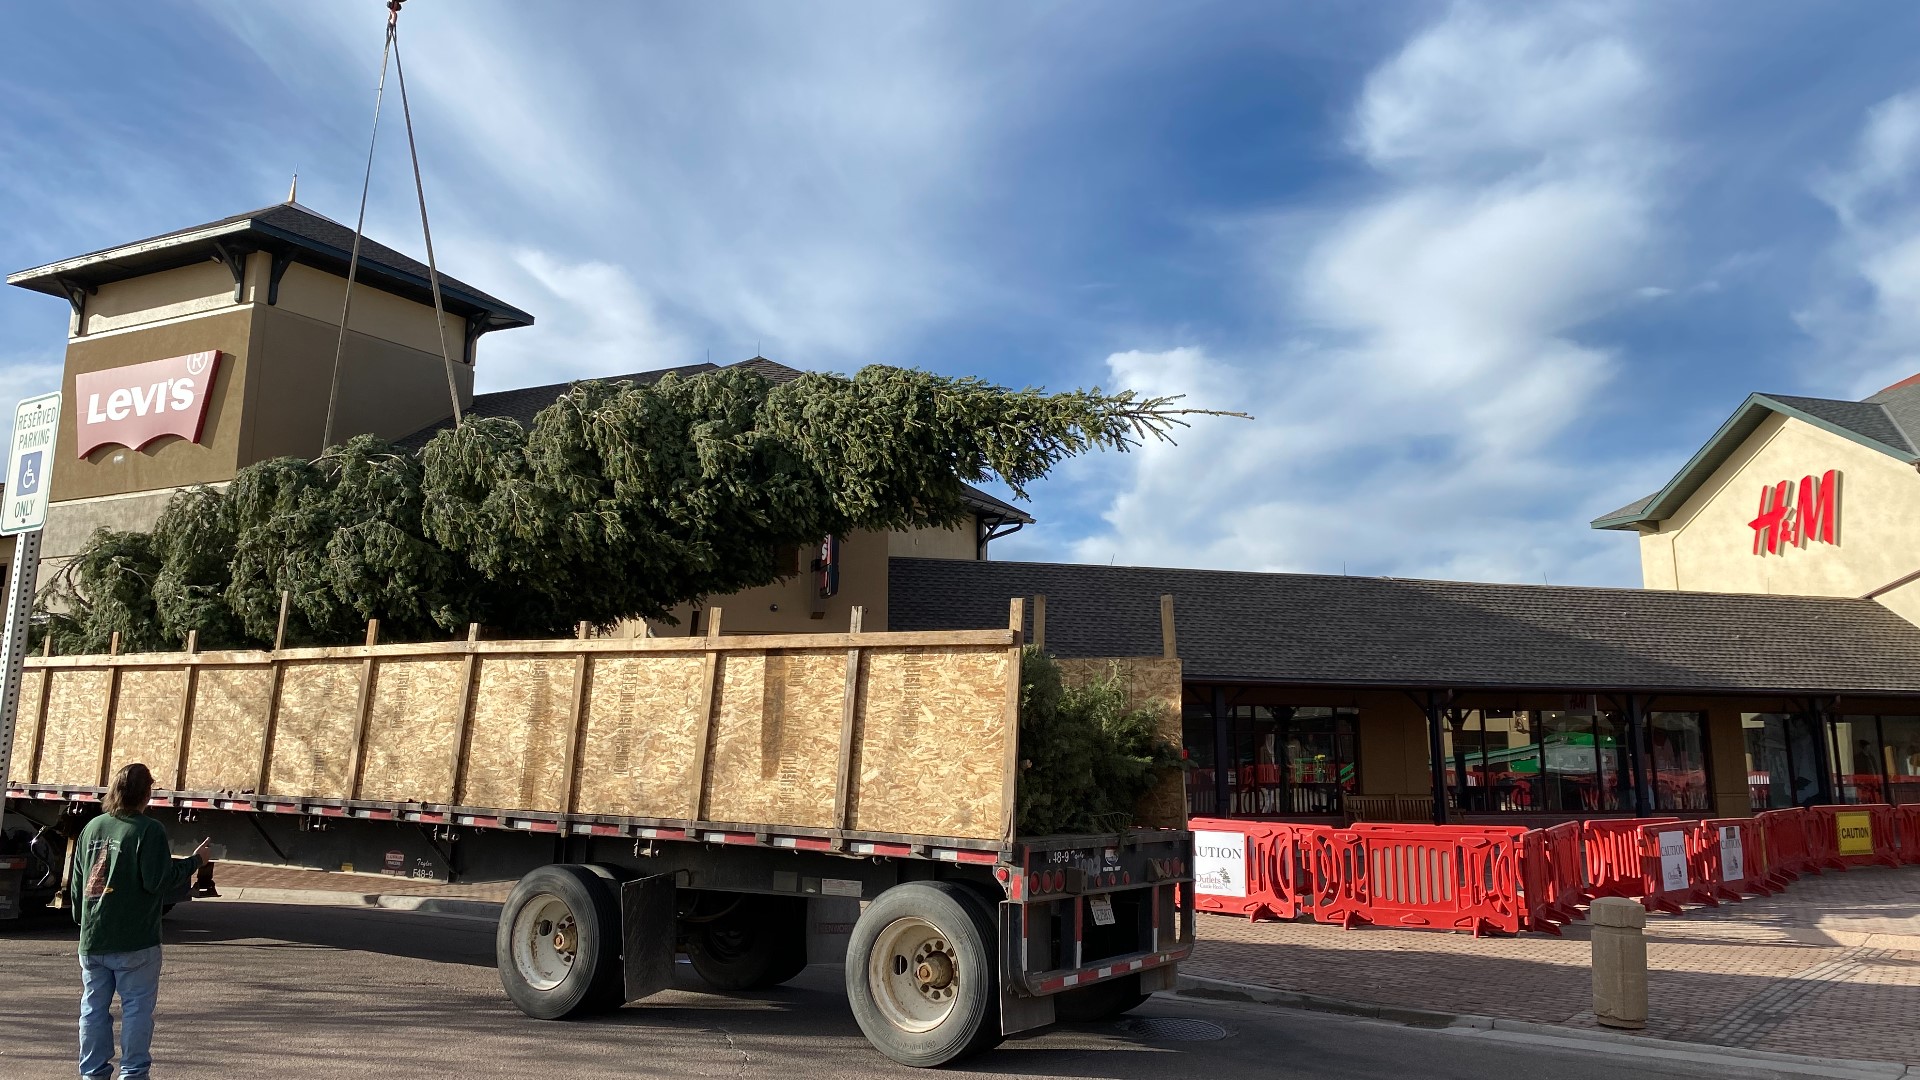 55-foot-tall Christmas tree arrives at Outlets at Castle Rock 